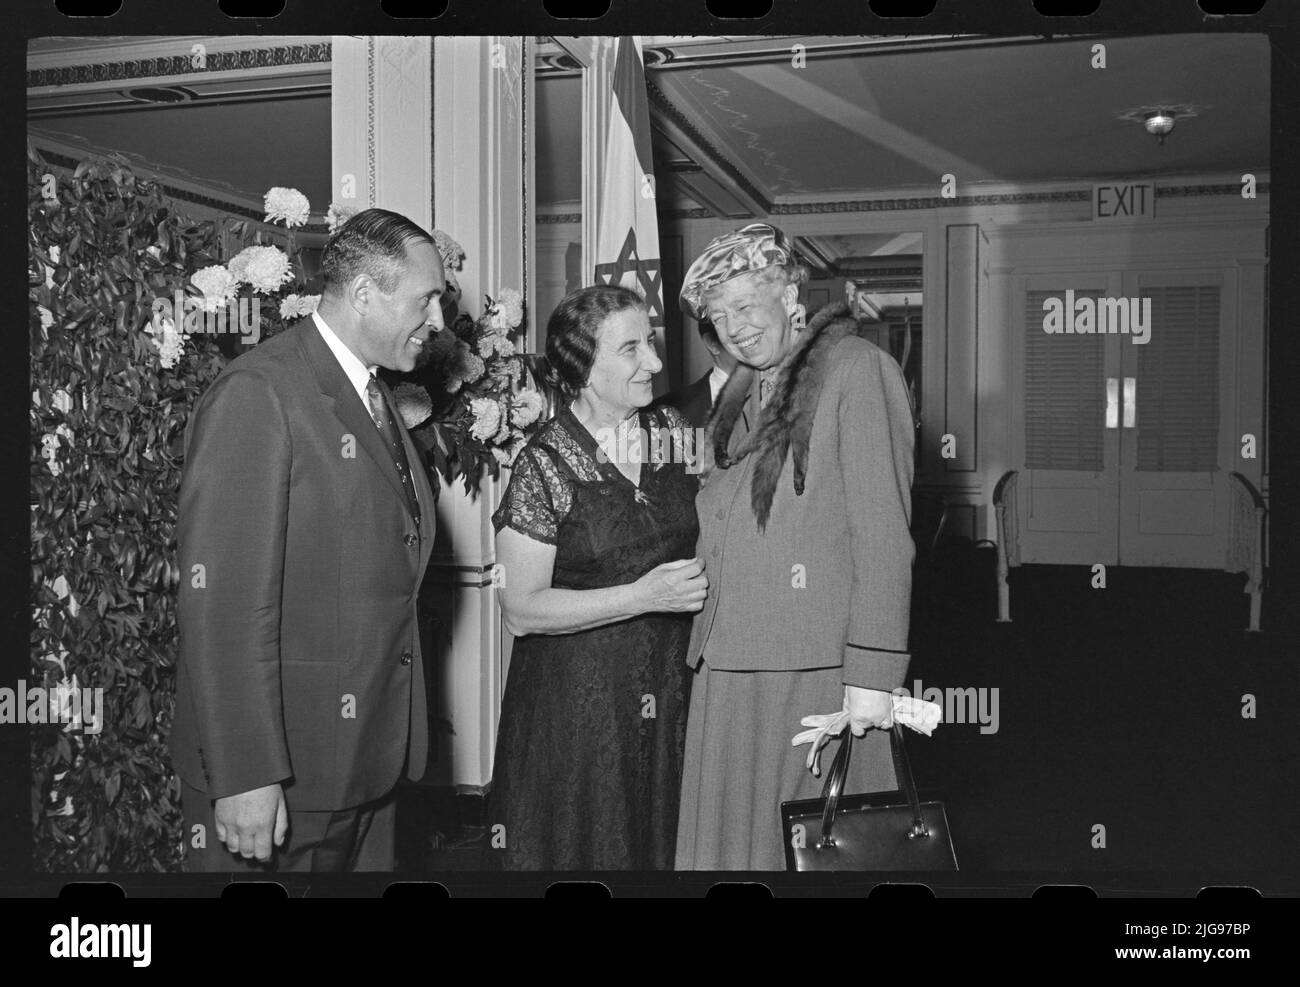 Eleanor Roosevelt and Golda Meir meet in New York, 1961.  Image from 35mm negative. Stock Photo